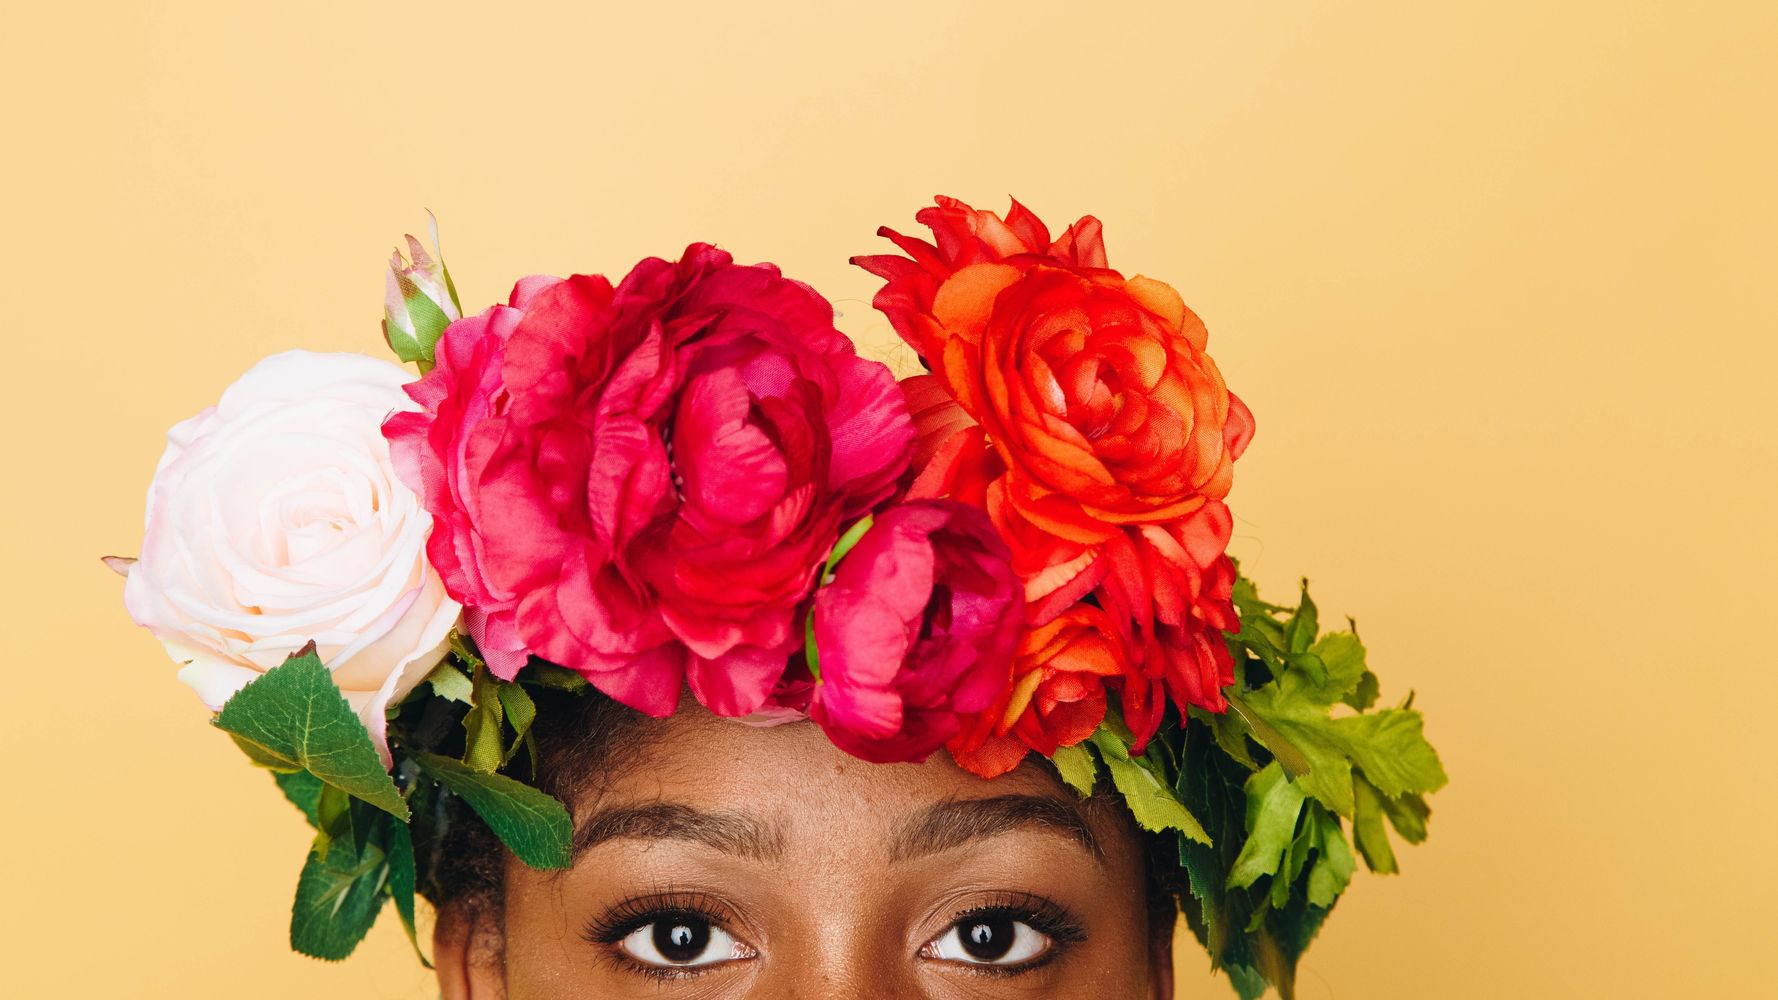 How To Make A Flower Crown In 6 Simple Steps - Fiftyflowers